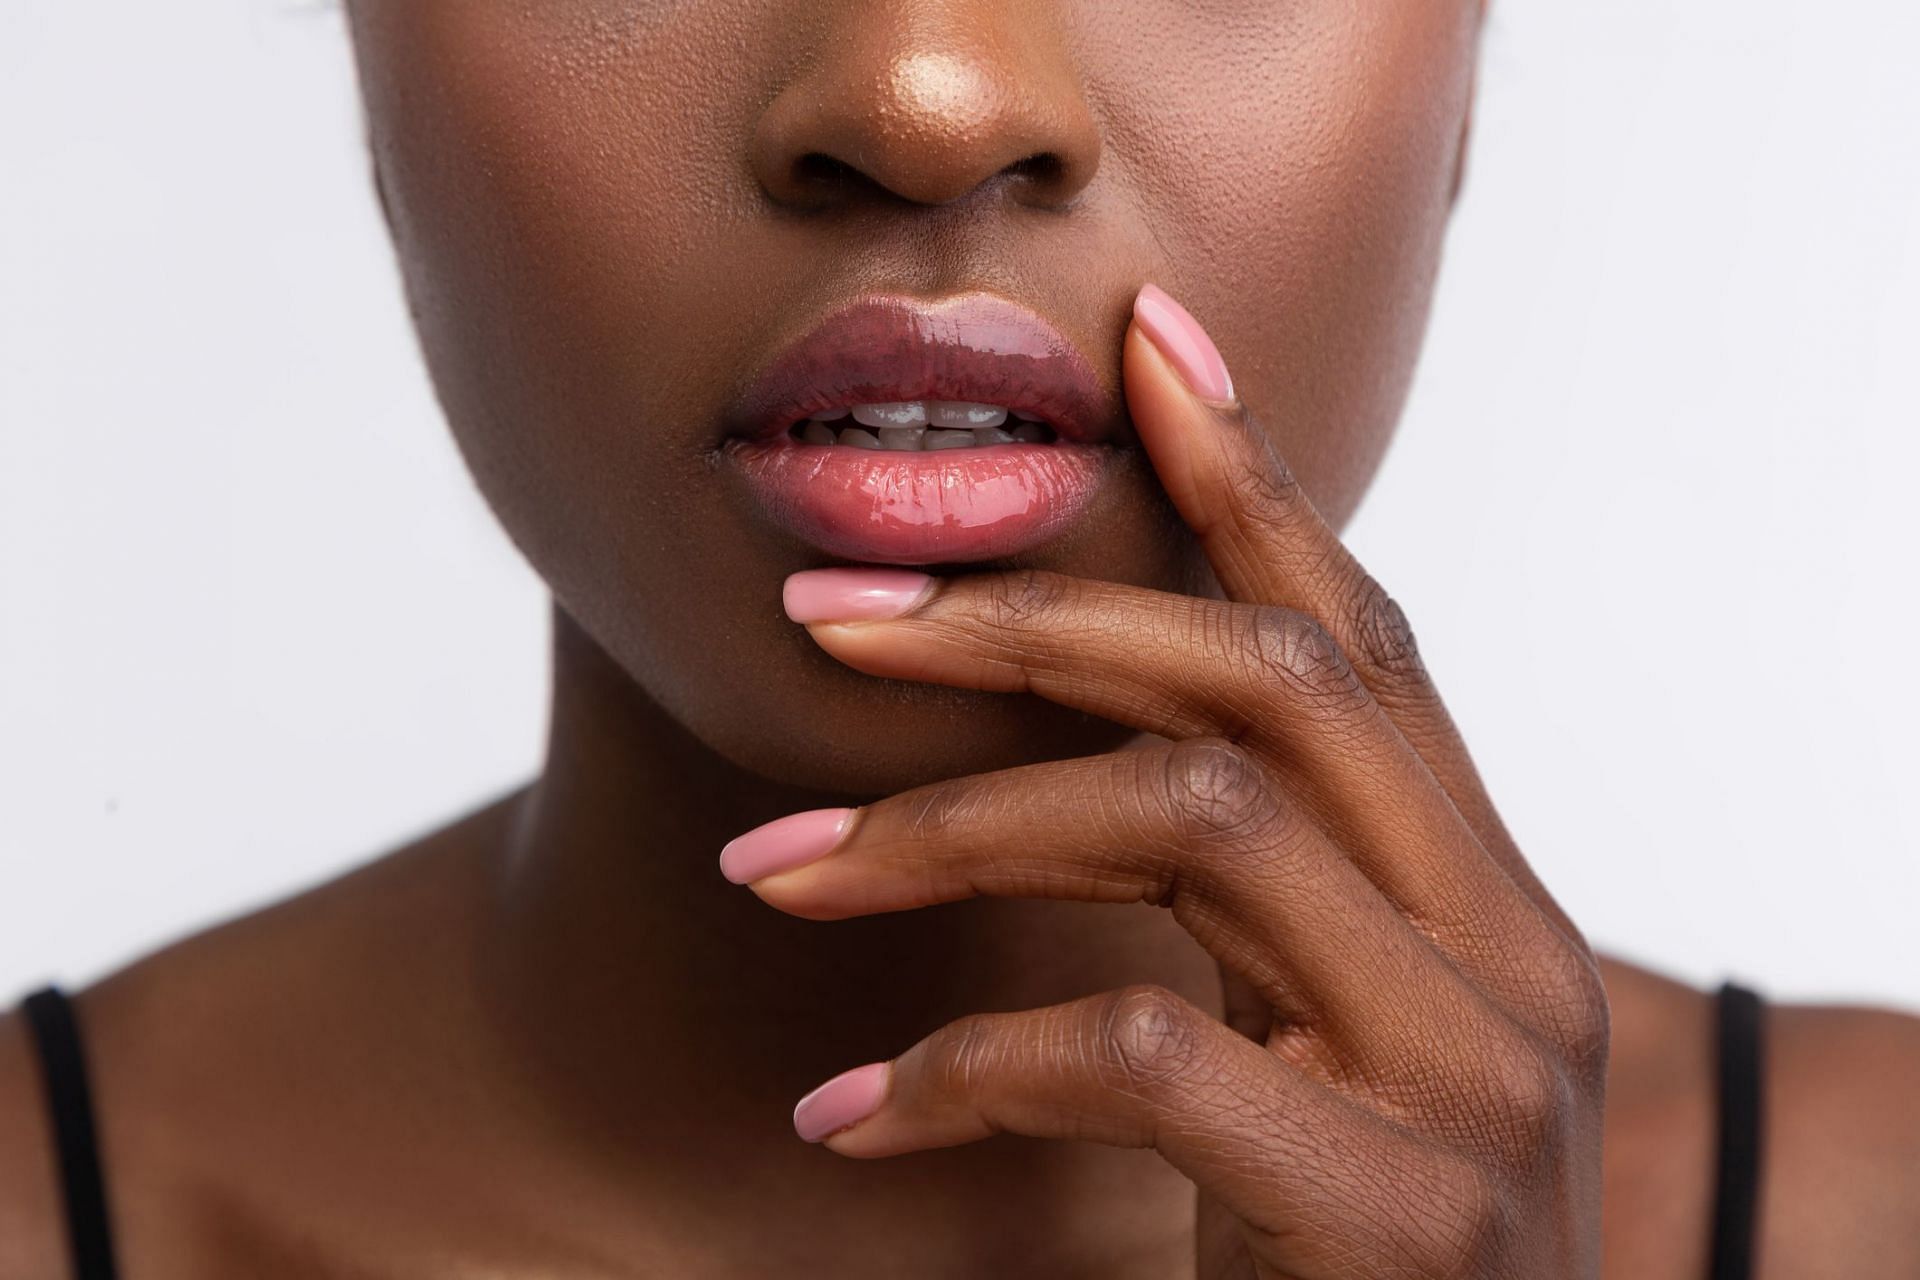 Home remedies for Dark Lips (Image via Getty Images/Yacobchuk)